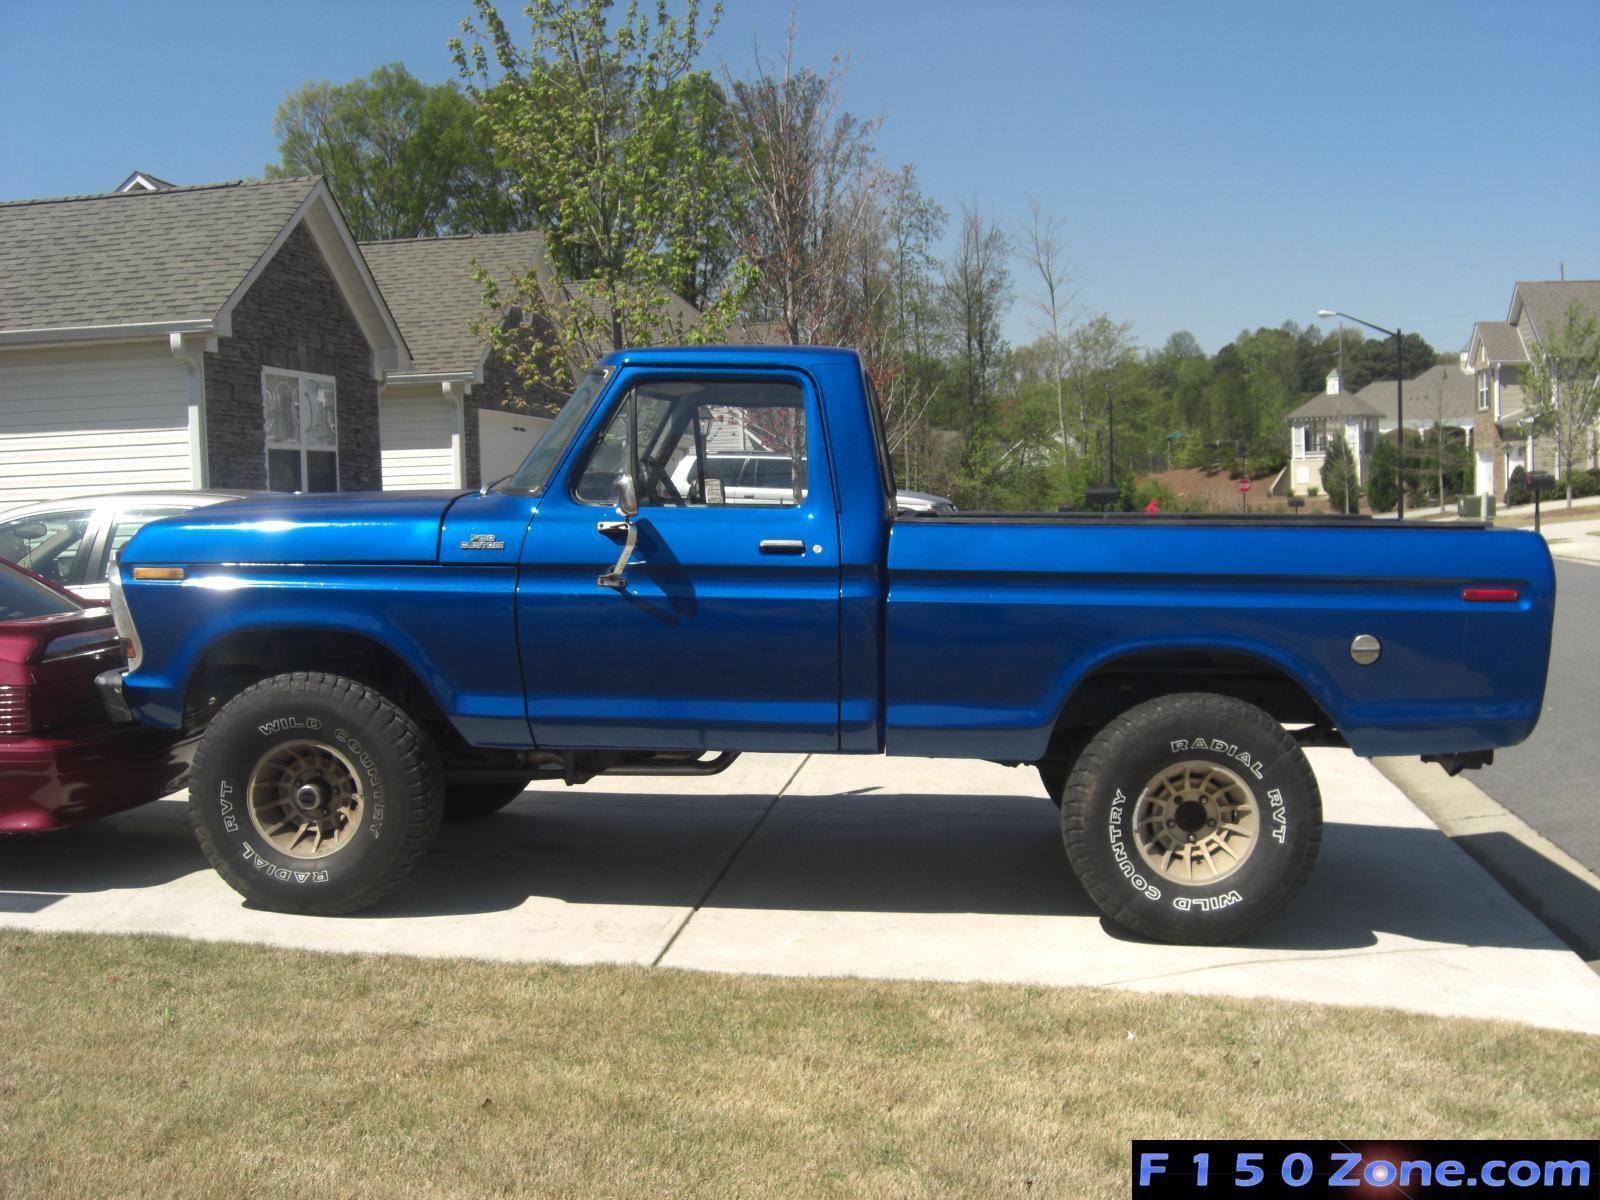 My 1978 Ford F-150 4x4